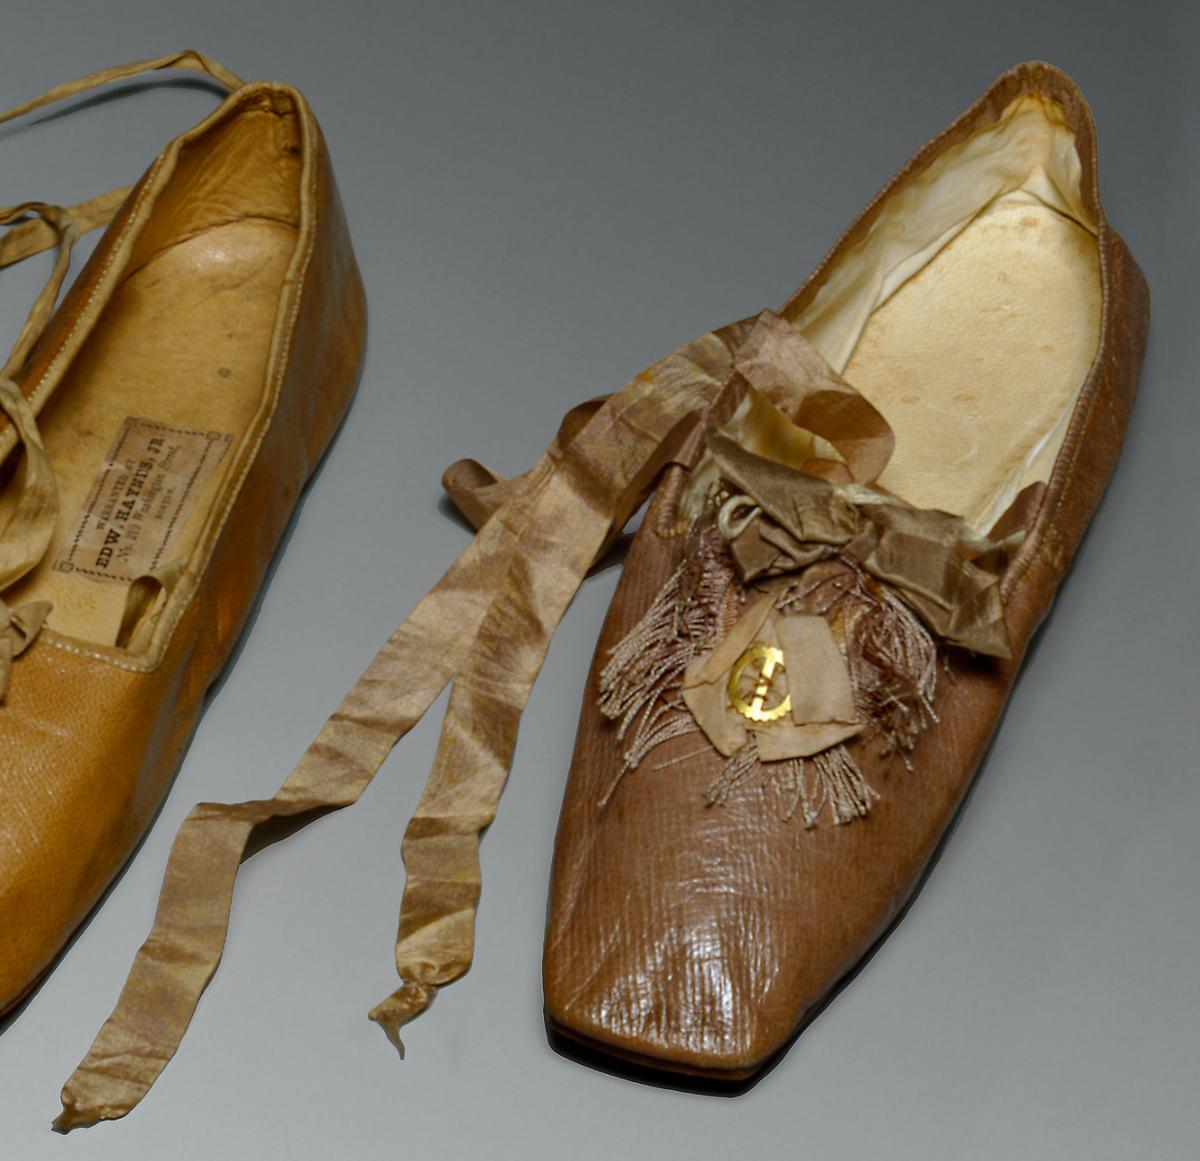 A pair of beige shoes, topped with velvet ribbon and a small charm in the shape of an anchor